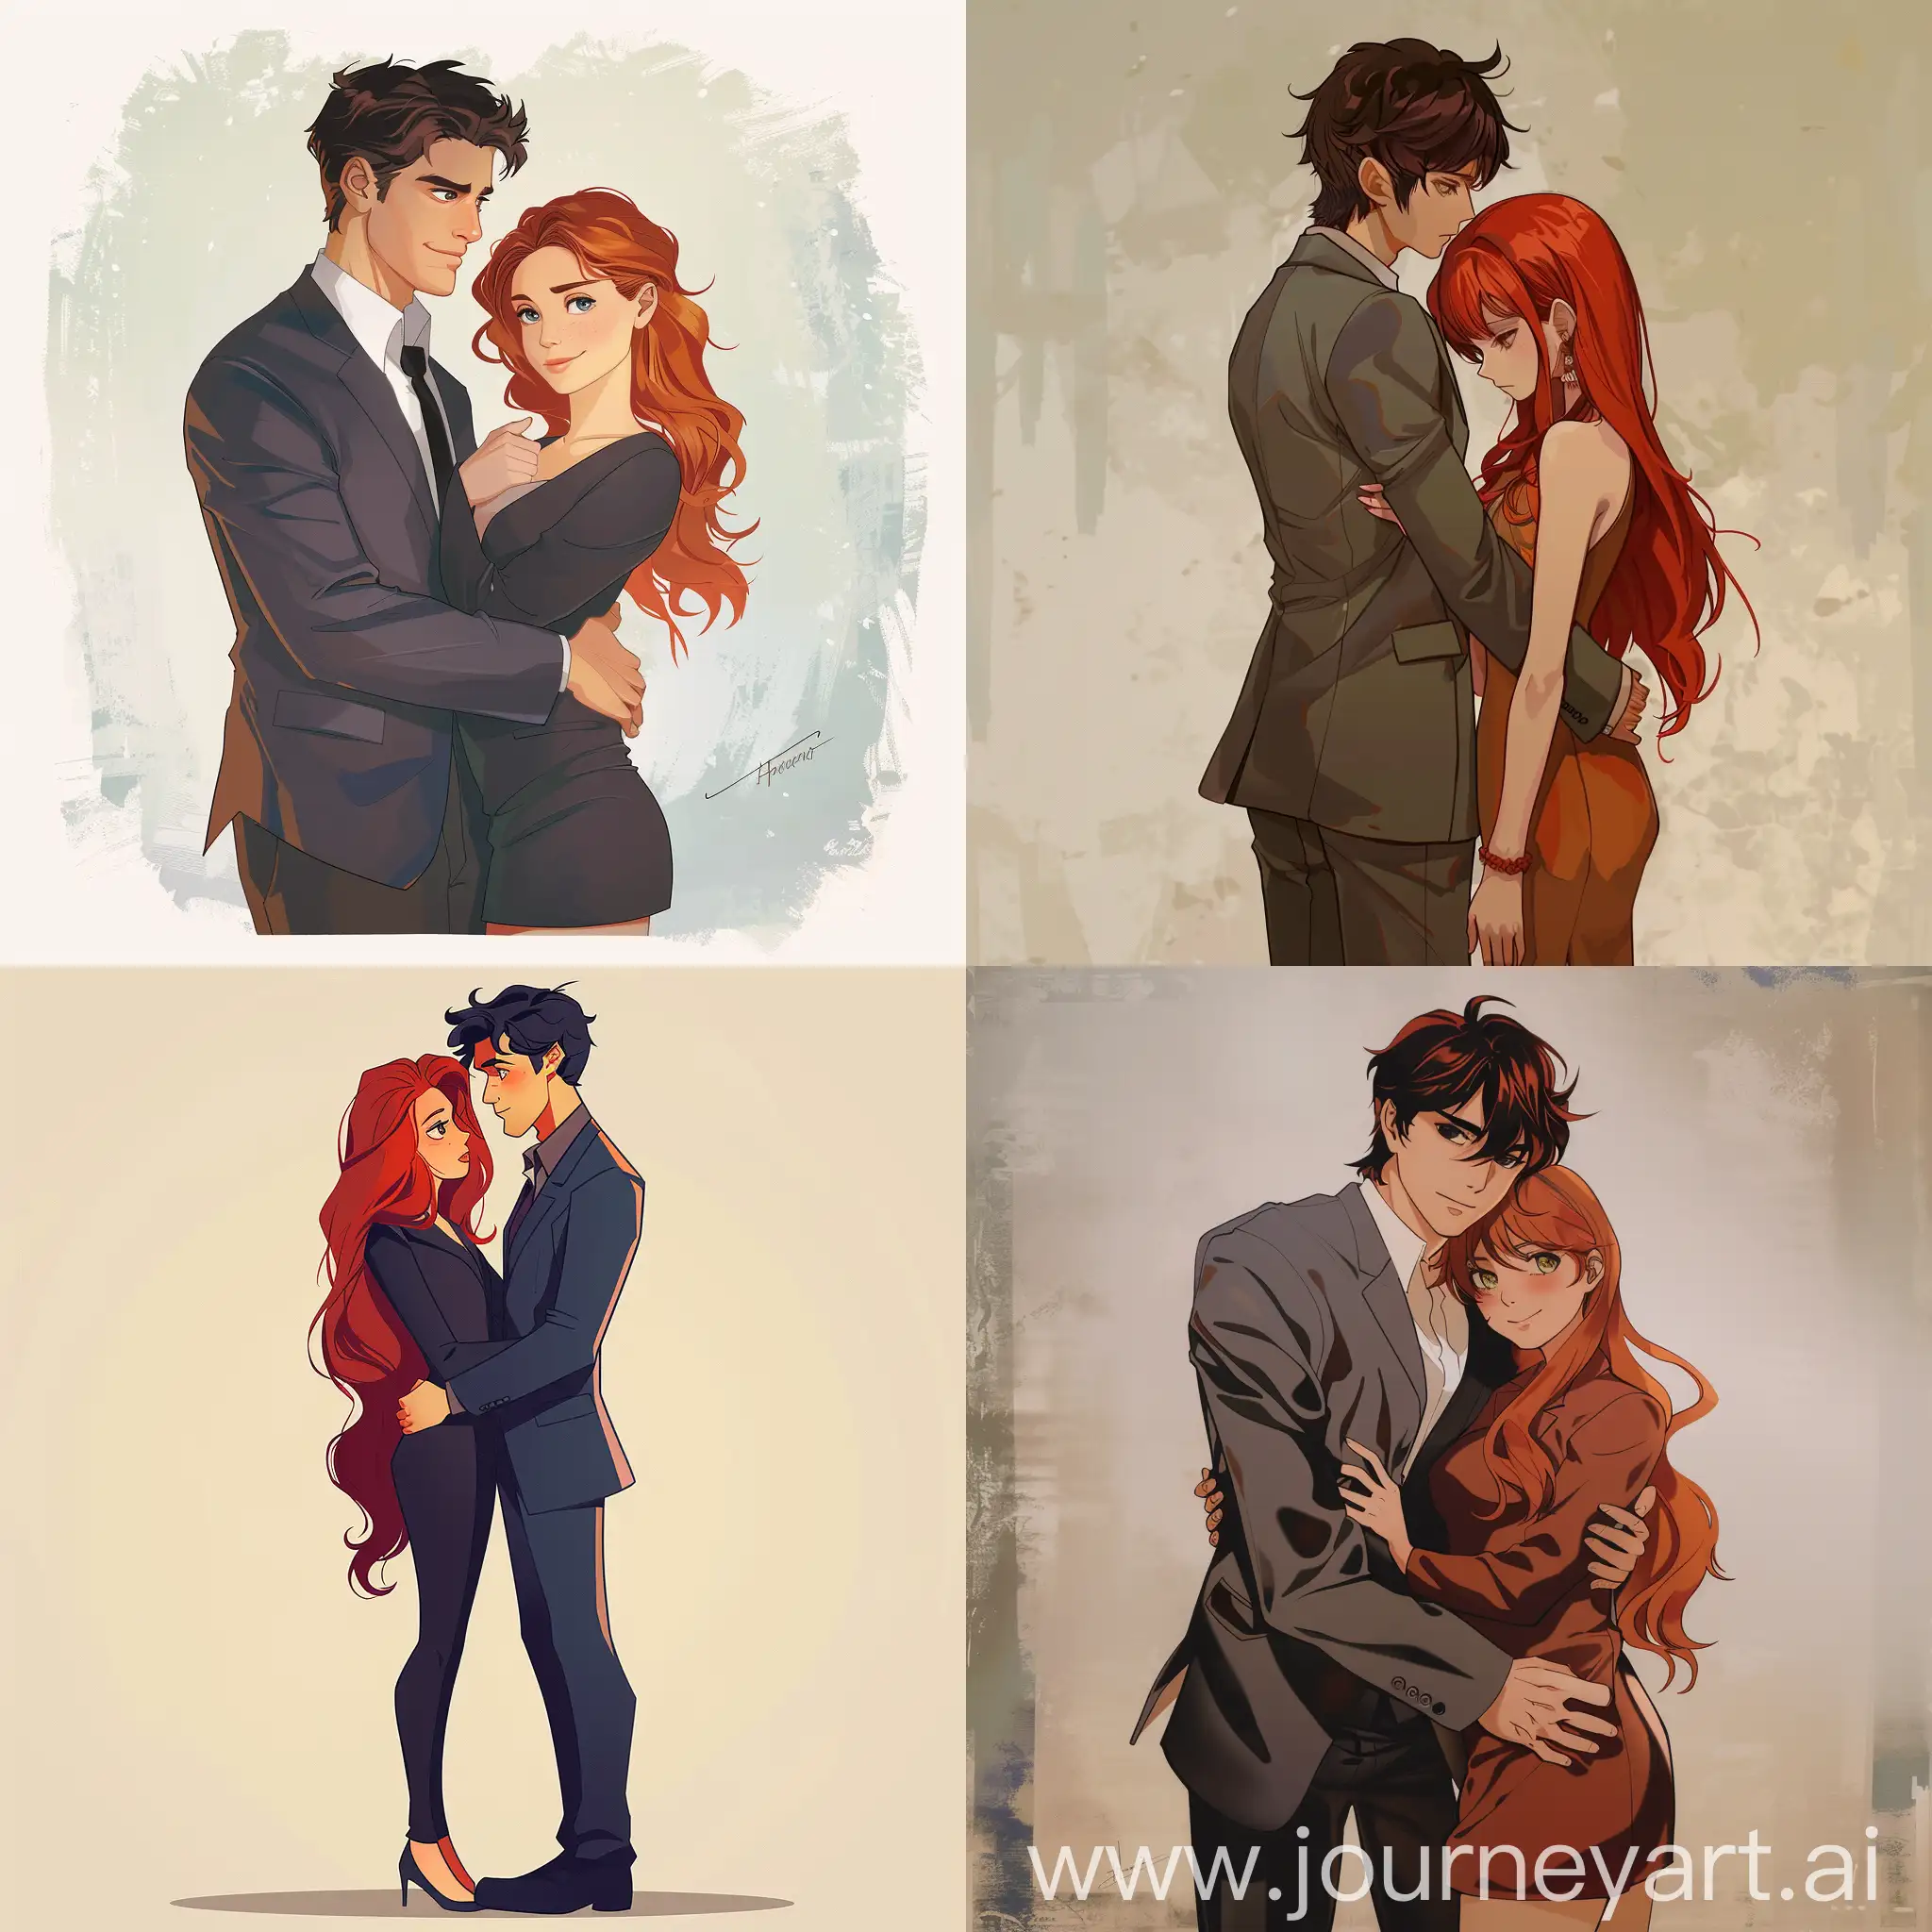 Elegant-DarkHaired-Man-Embracing-RedHaired-Girl-in-Formal-Attire